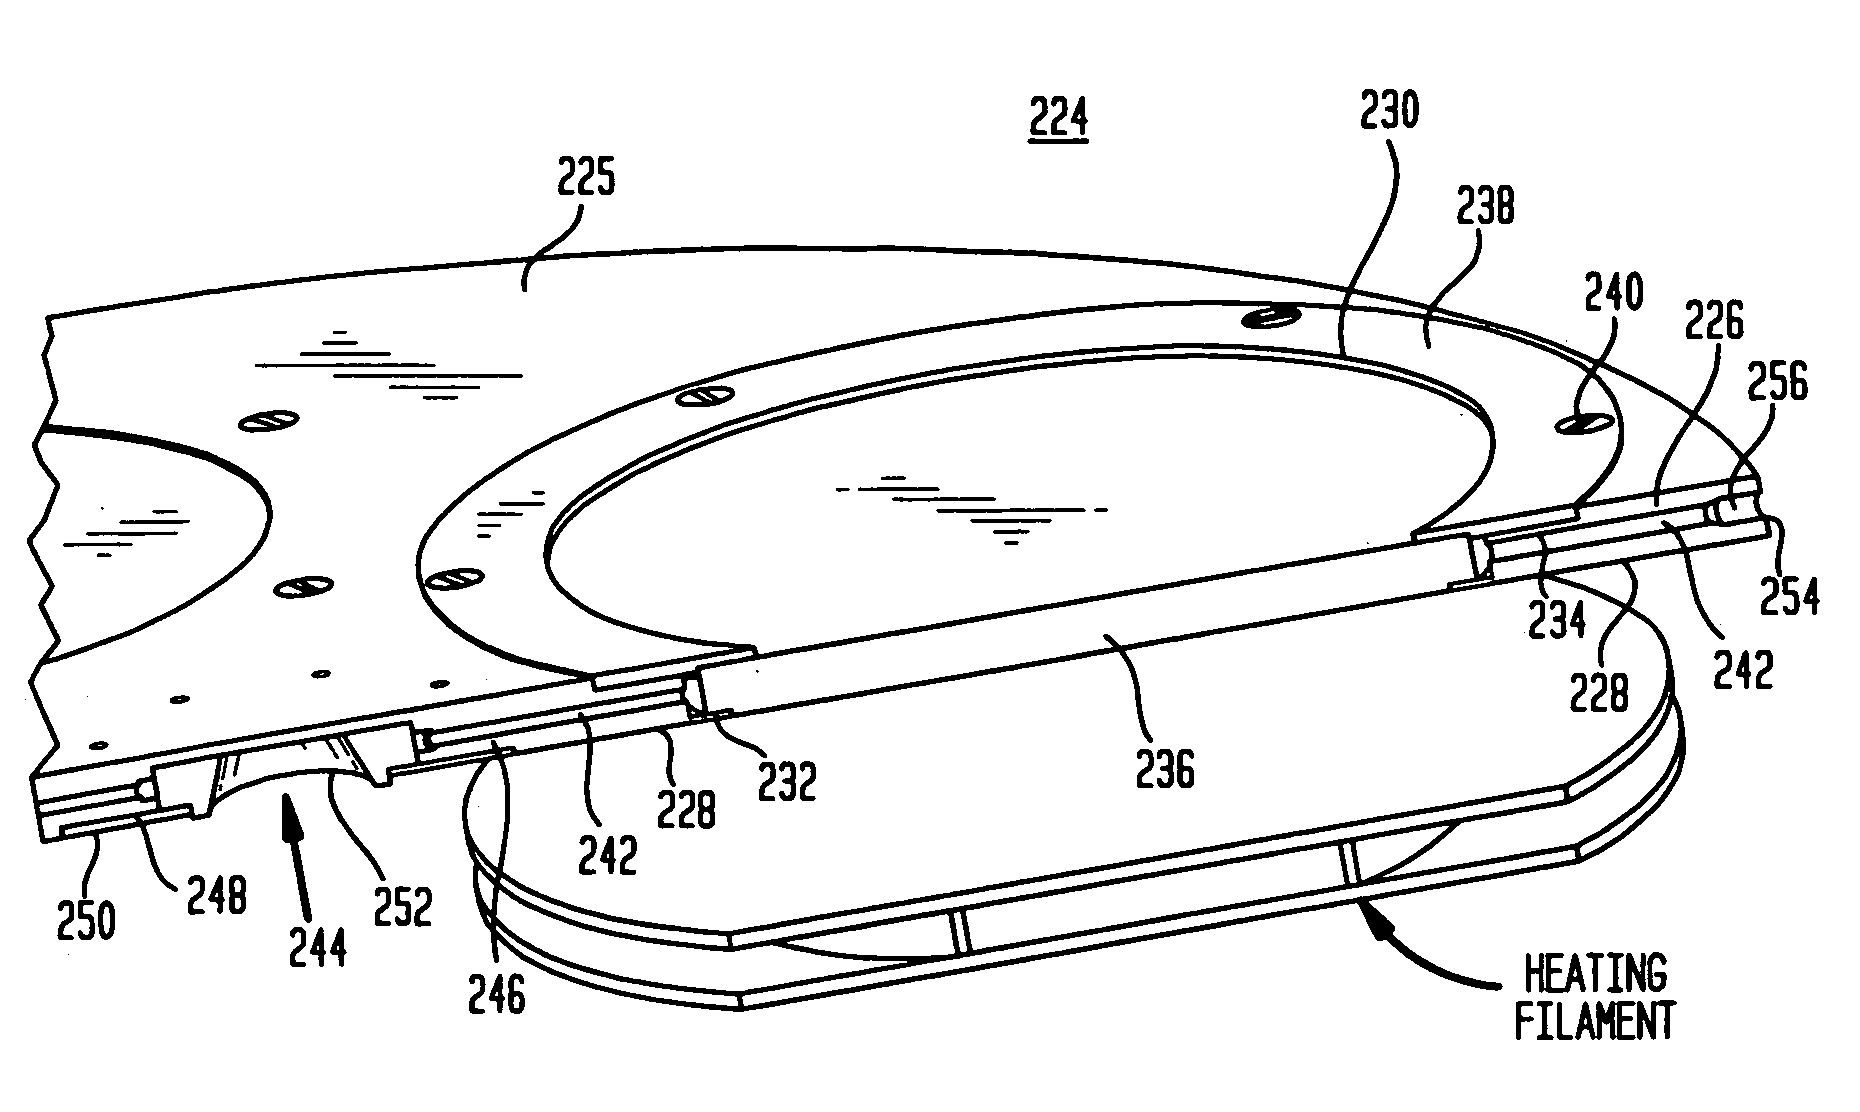 Wafer carrier for growing GaN wafers